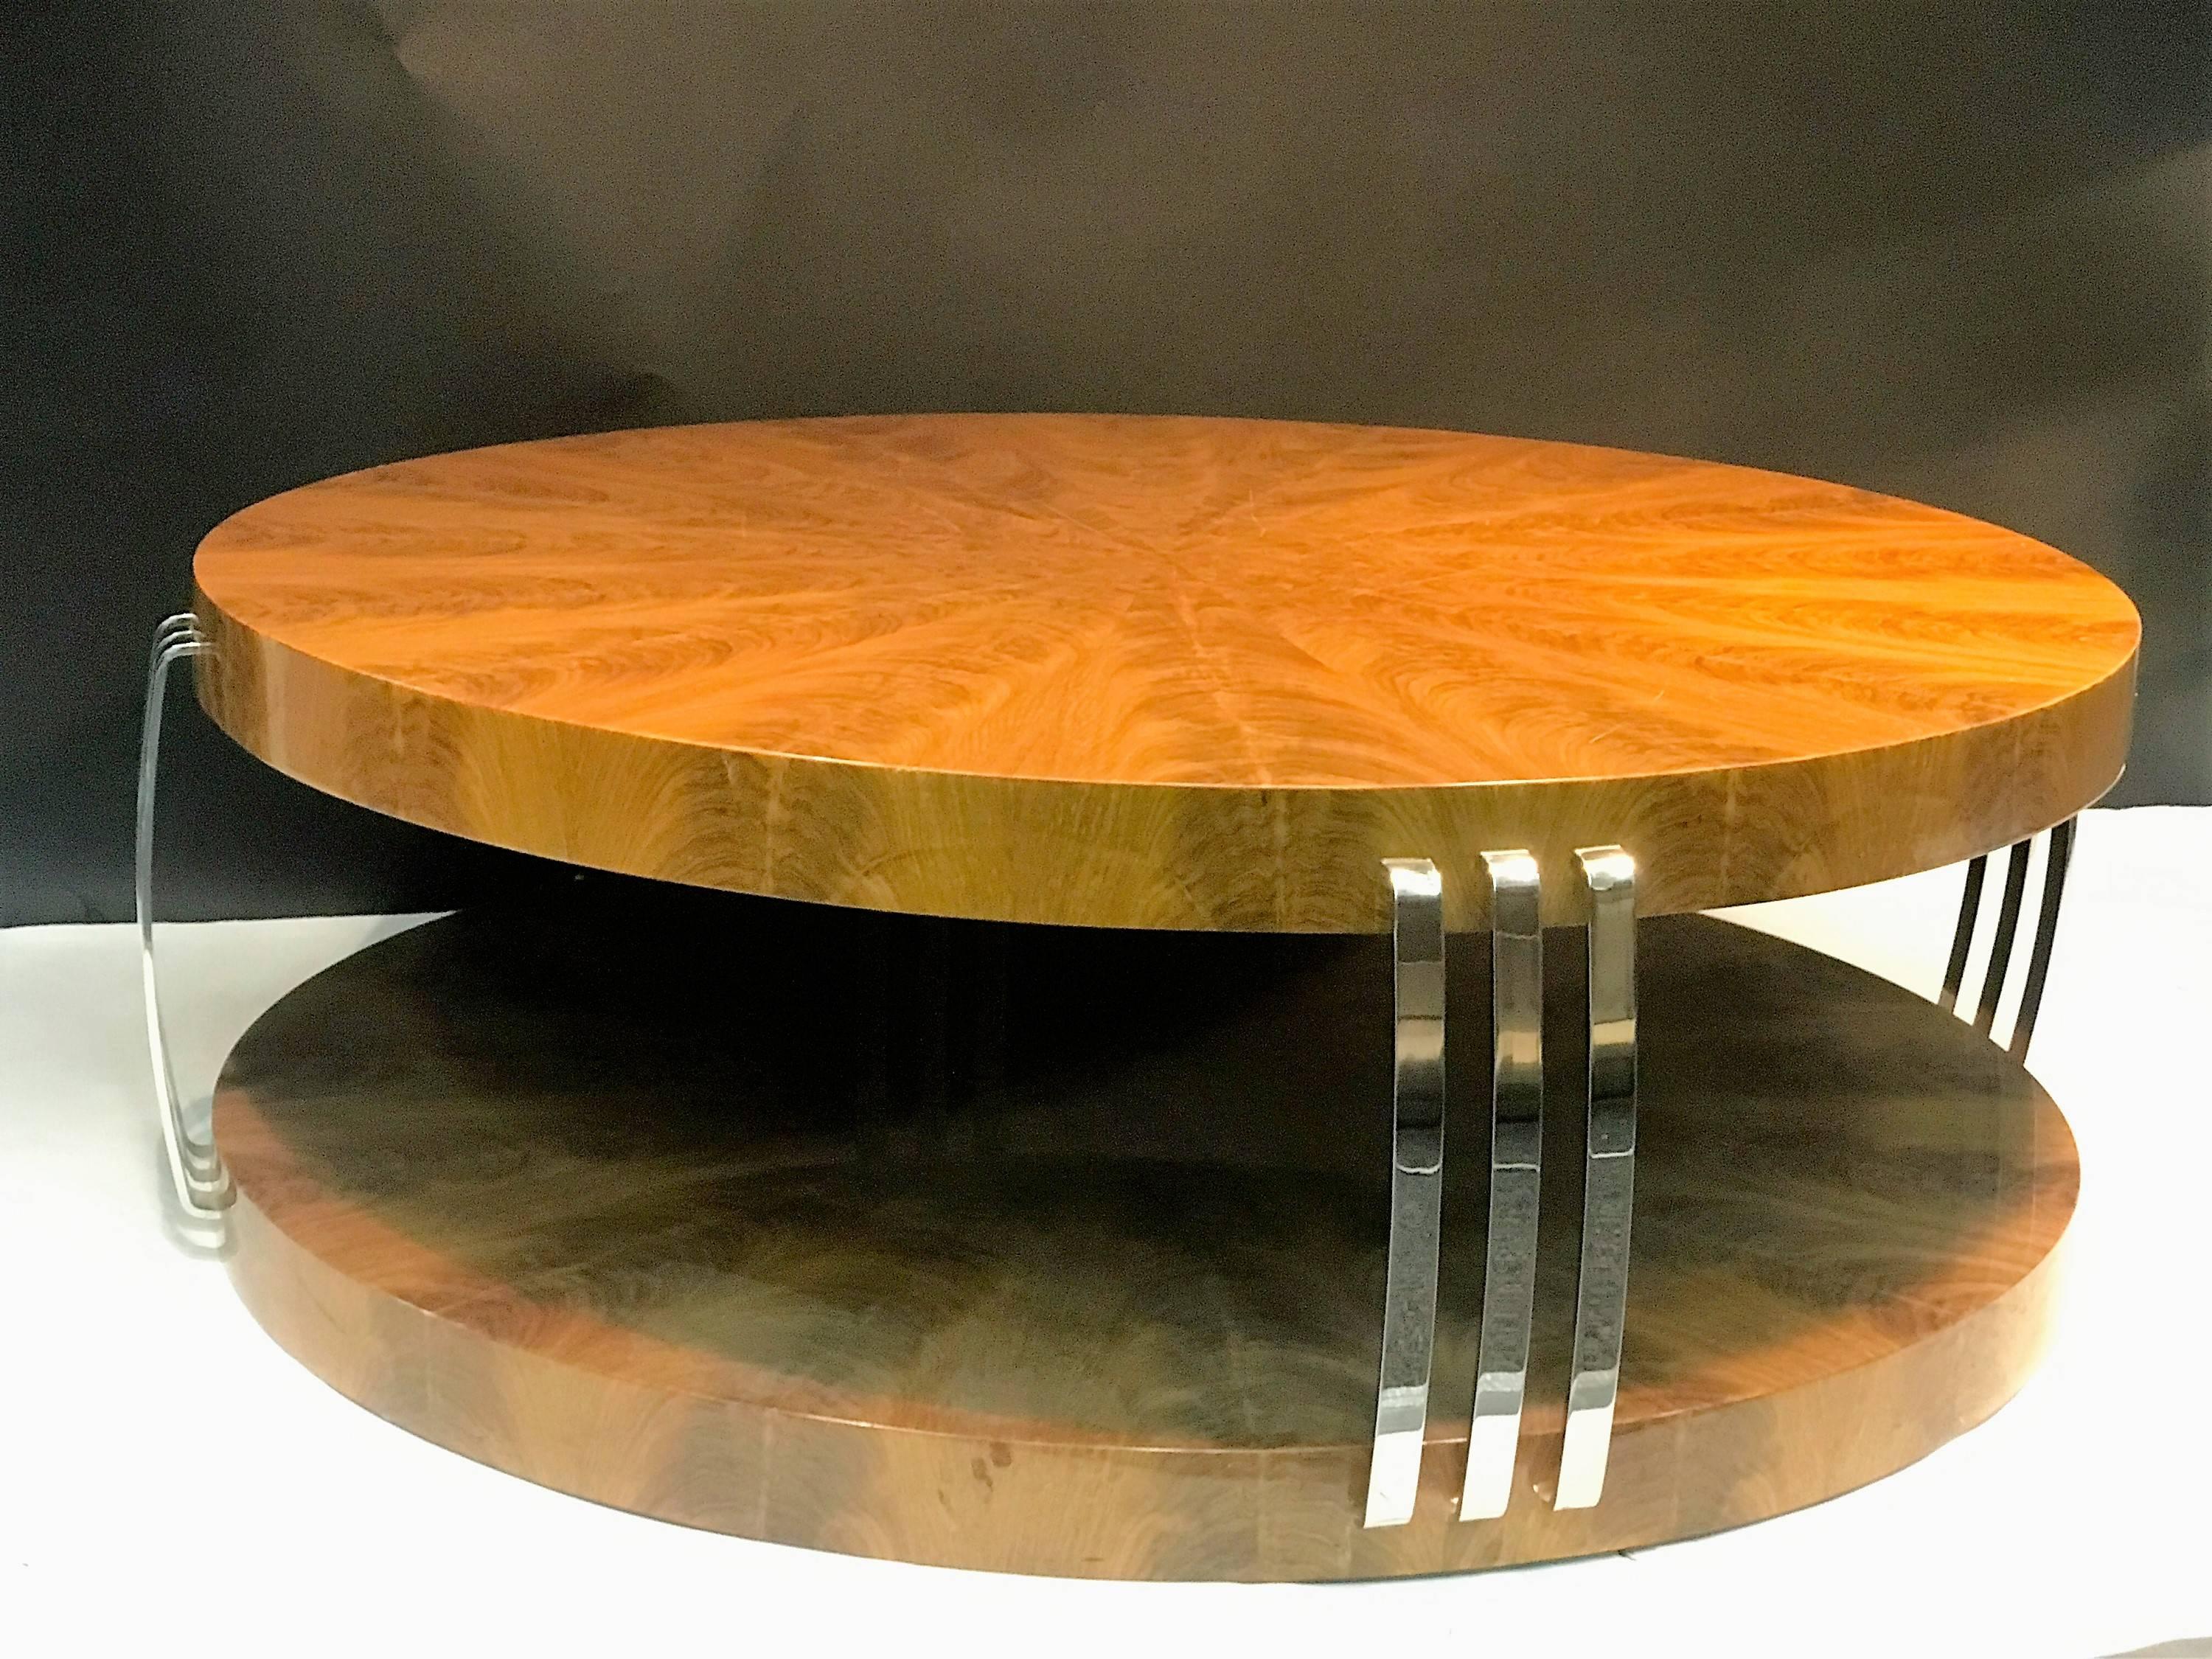 Massive round burled wood double tier coffee table and four triple chrome band supports. Beautiful burled wood pattern, very substantial and high end. A great coffee table for a modern living room. The round wood top is 3